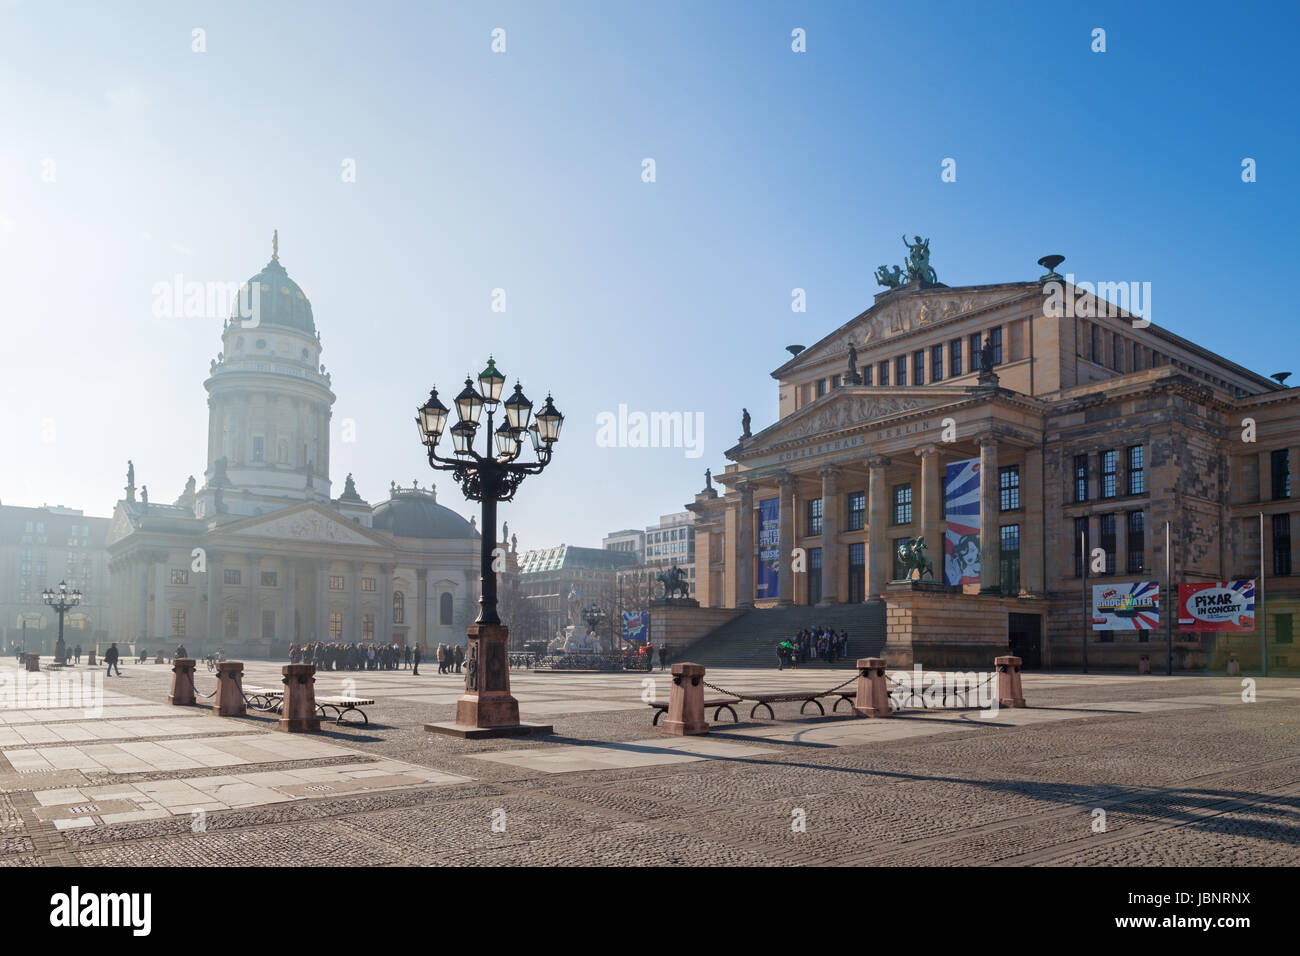 BERLIN, GERMANY, FEBRUARY - 14, 2017: The Konzerthaus building and the memorial of Friedrich Schiller and German dom on the Gendarmenmarkt square. Stock Photo